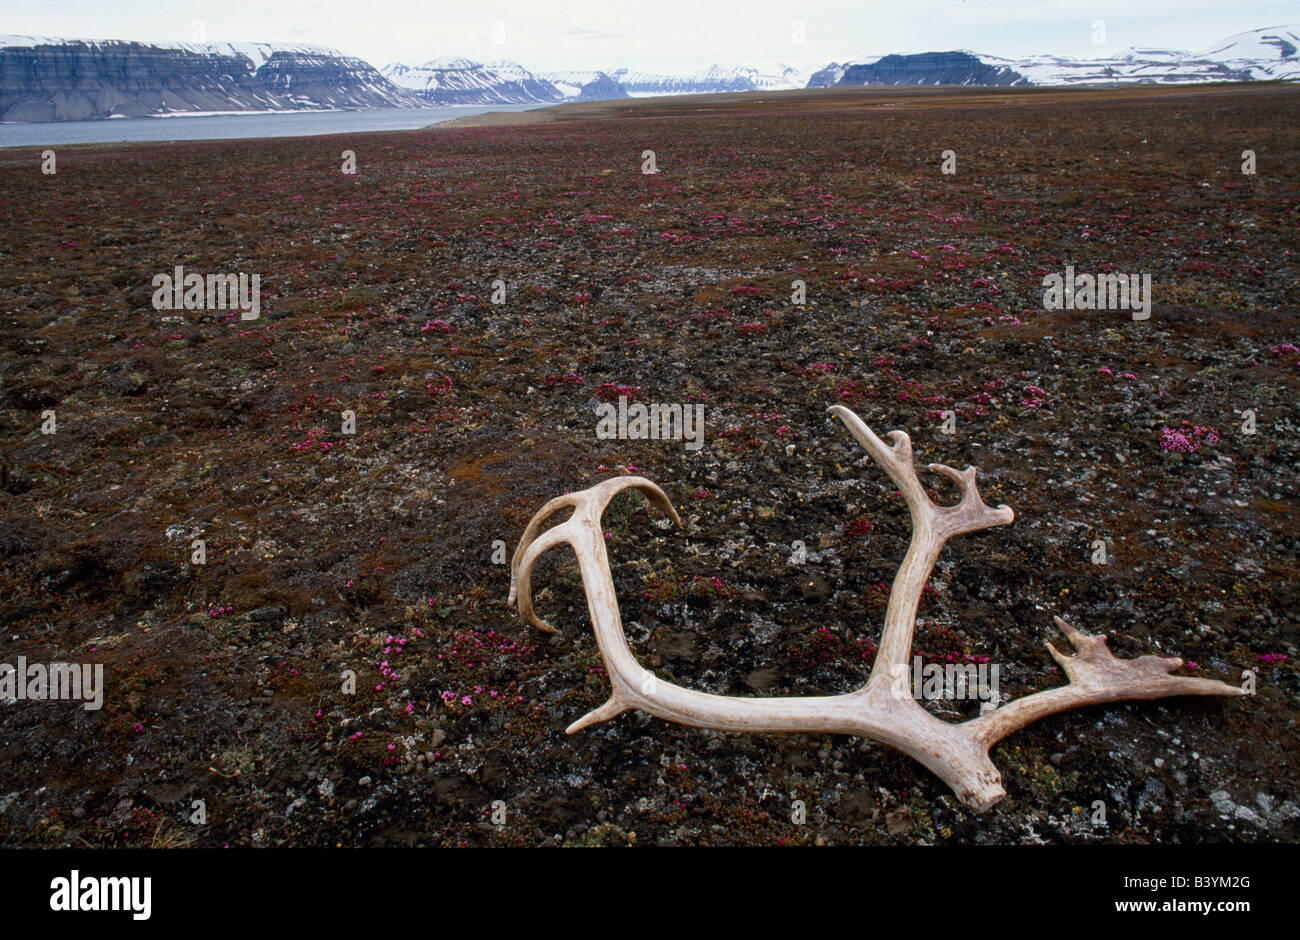 Norway, Svalbard, Spitsbergen. Reindeer antler lying on tundra, speckled with saxifrage flowers. Stock Photo